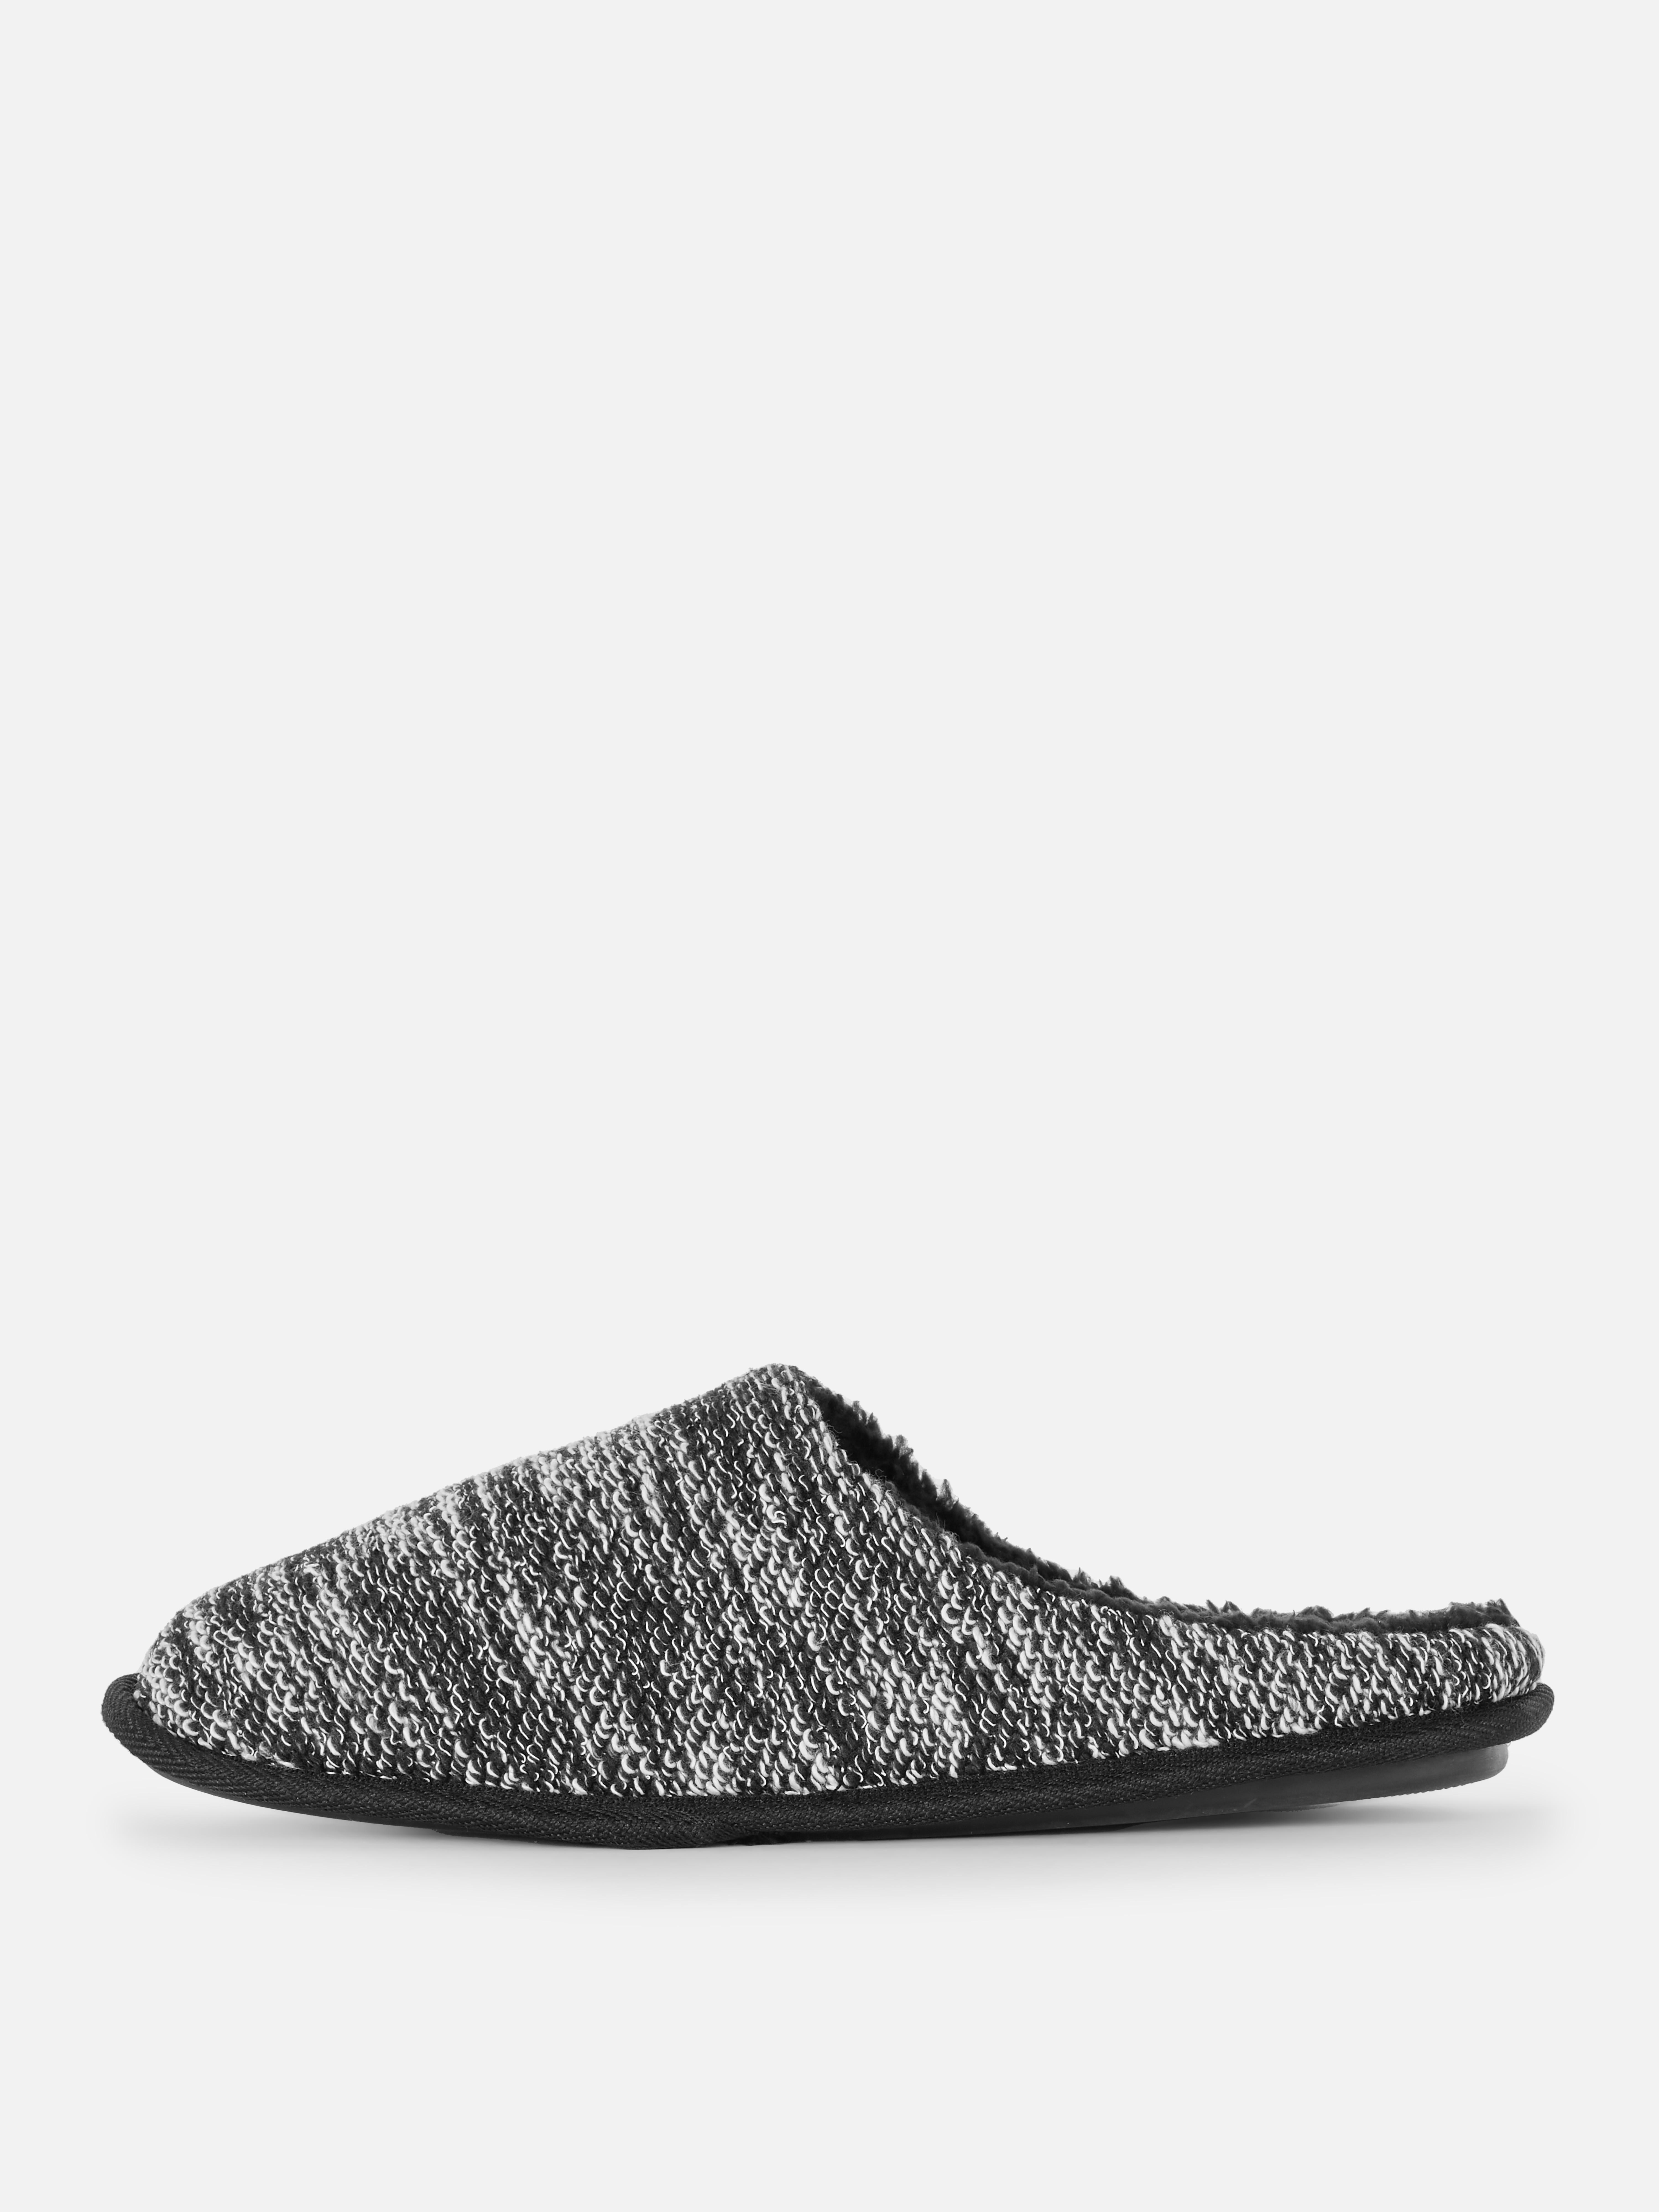 Textured Mule Slippers